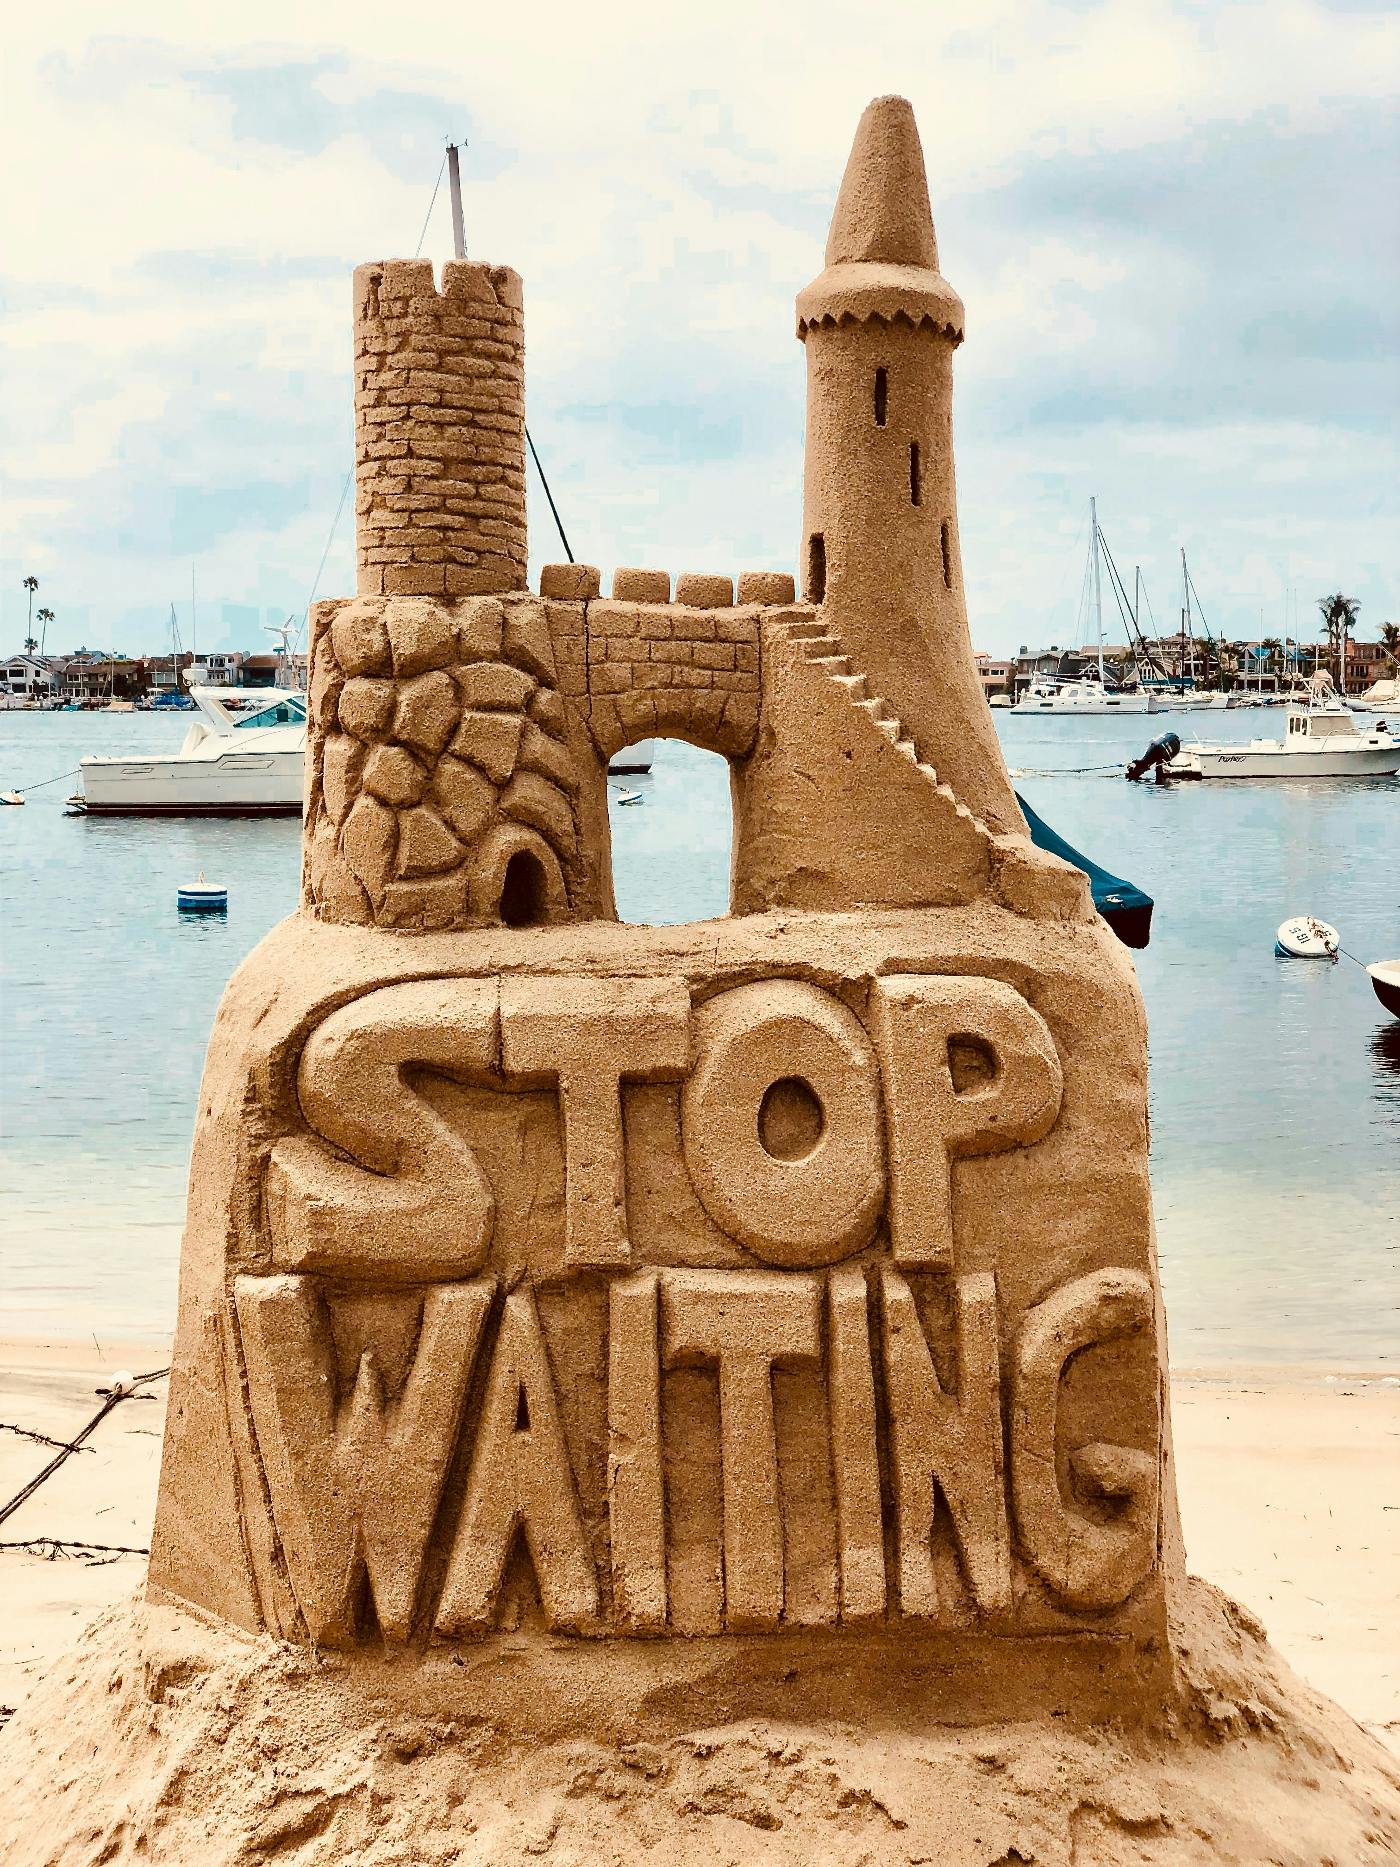 A sand castle with Stop Waiting on the side wall